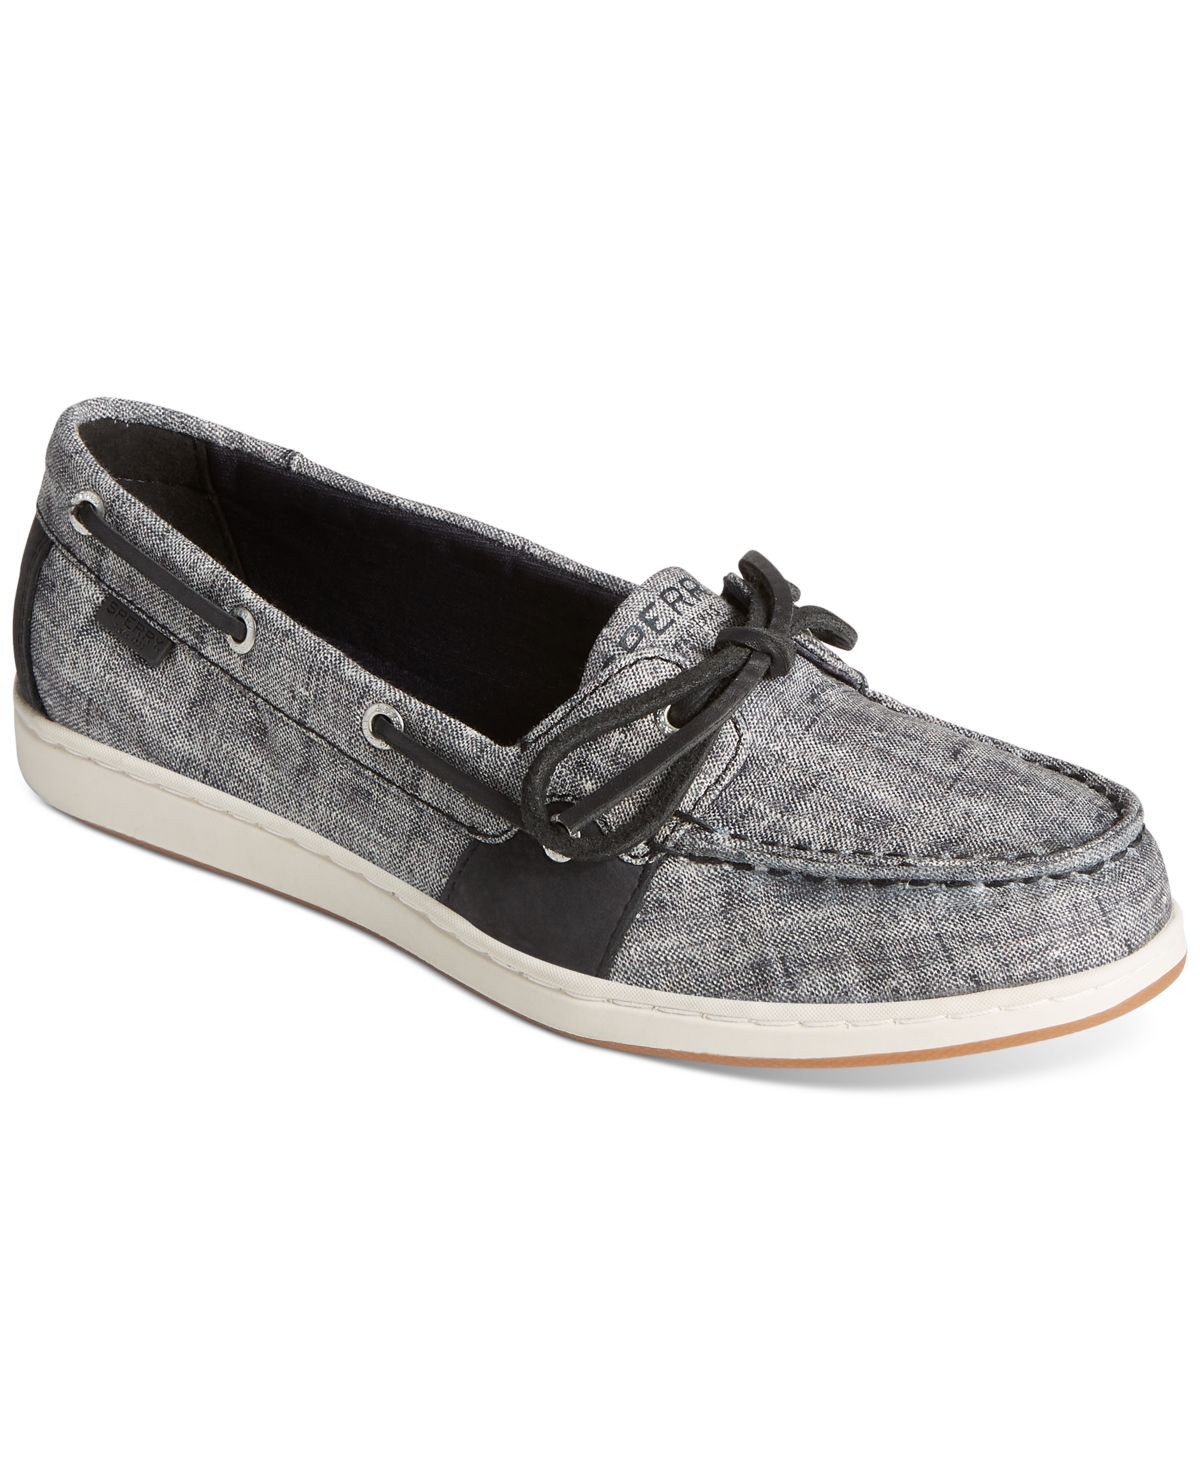 SPERRY WOMEN'S COASTFISH TWO-TONE BOAT SHOES WOMEN'S SHOES